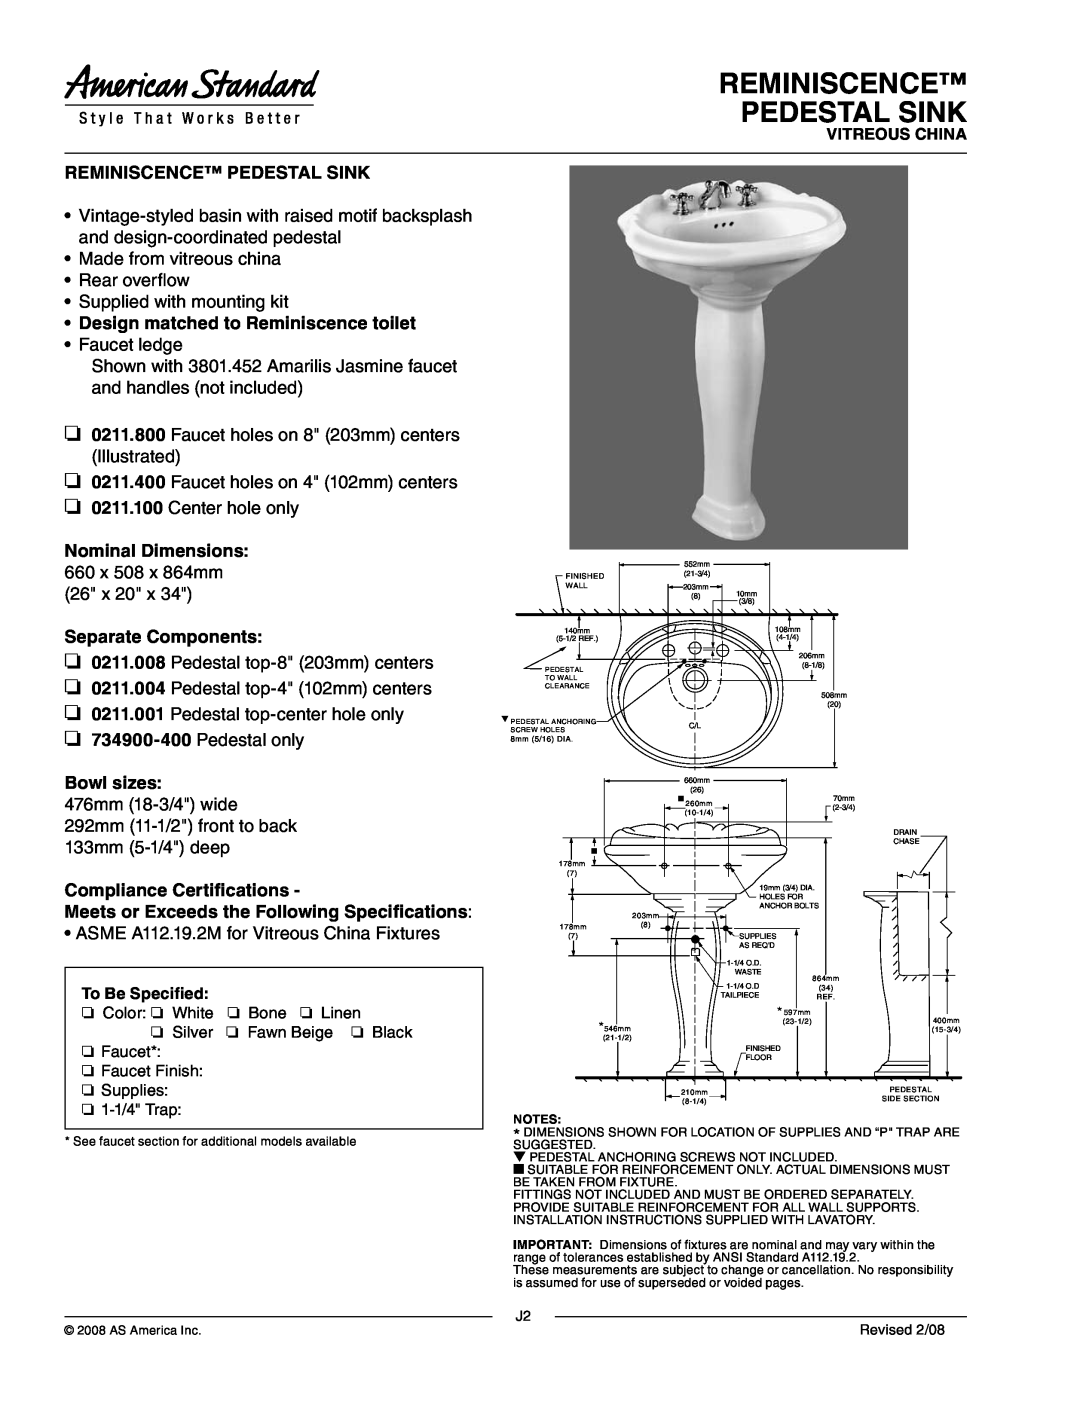 American Standard 0211.800 dimensions Reminiscence Pedestal Sink, Design matched to Reminiscence toilet, Bowl sizes 